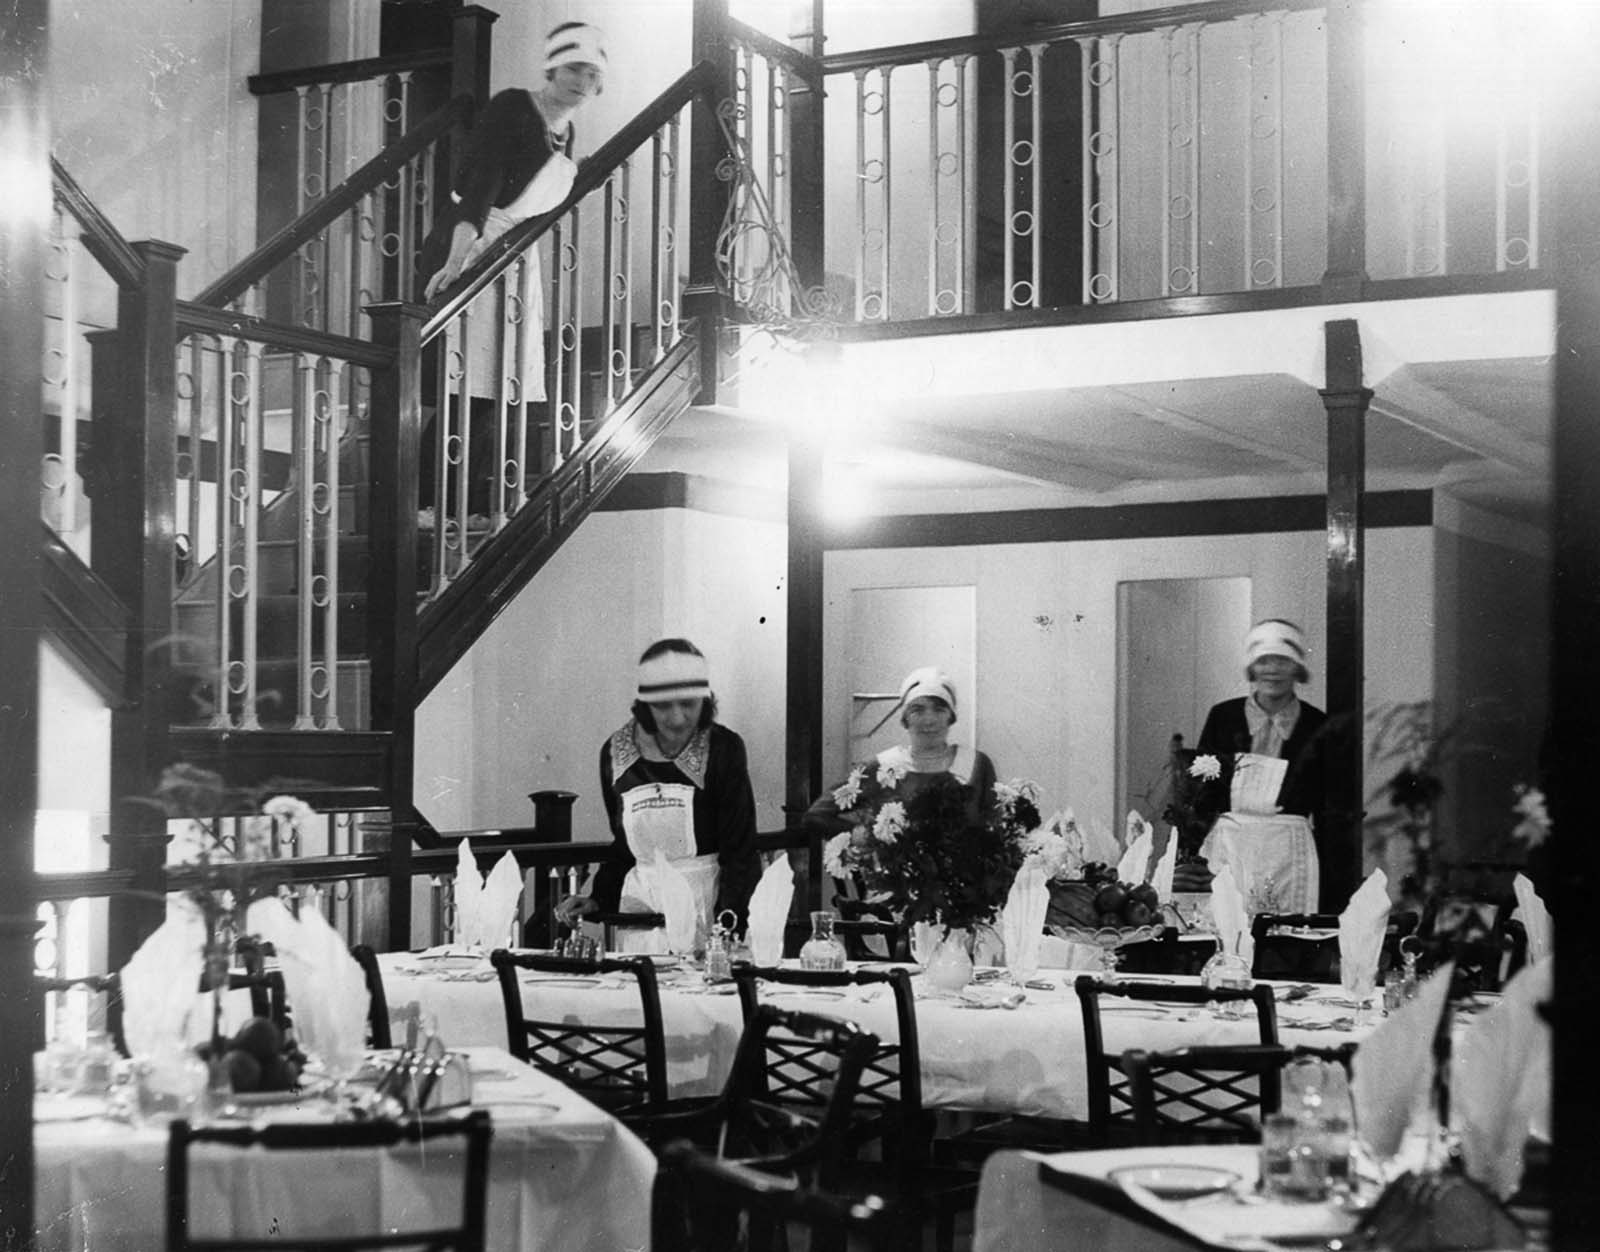 Maids set up tables in the lounge for a meal. 1929.